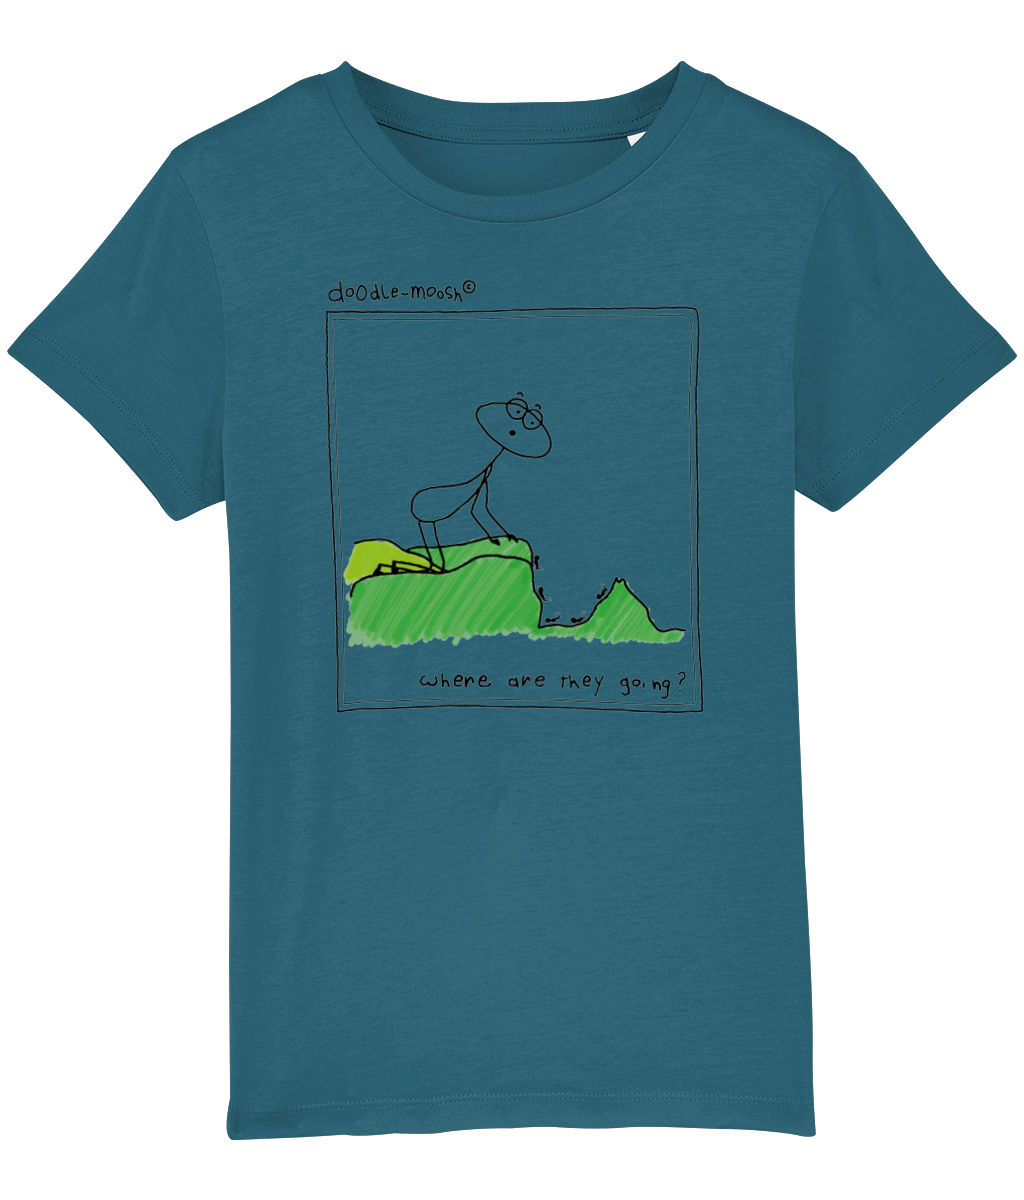 Where are they going t-shirt, blue with black, colourful drawing